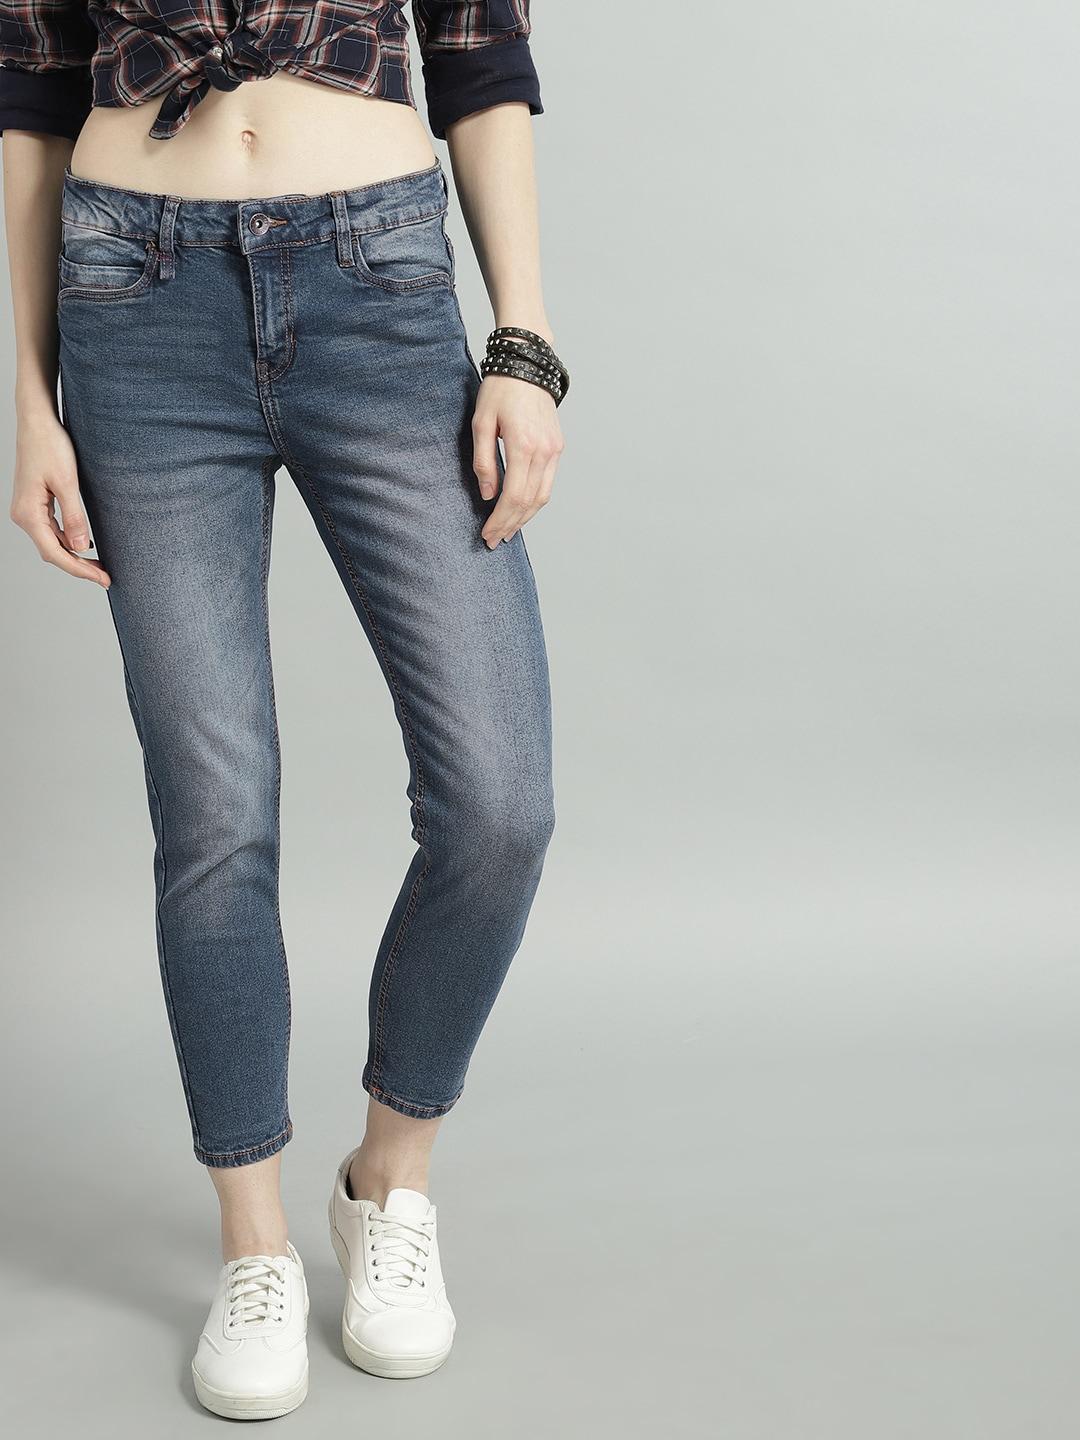 the-roadster-lifestyle-co-women-blue-skinny-fit-mid-rise-clean-look-stretchable-cropped-jeans